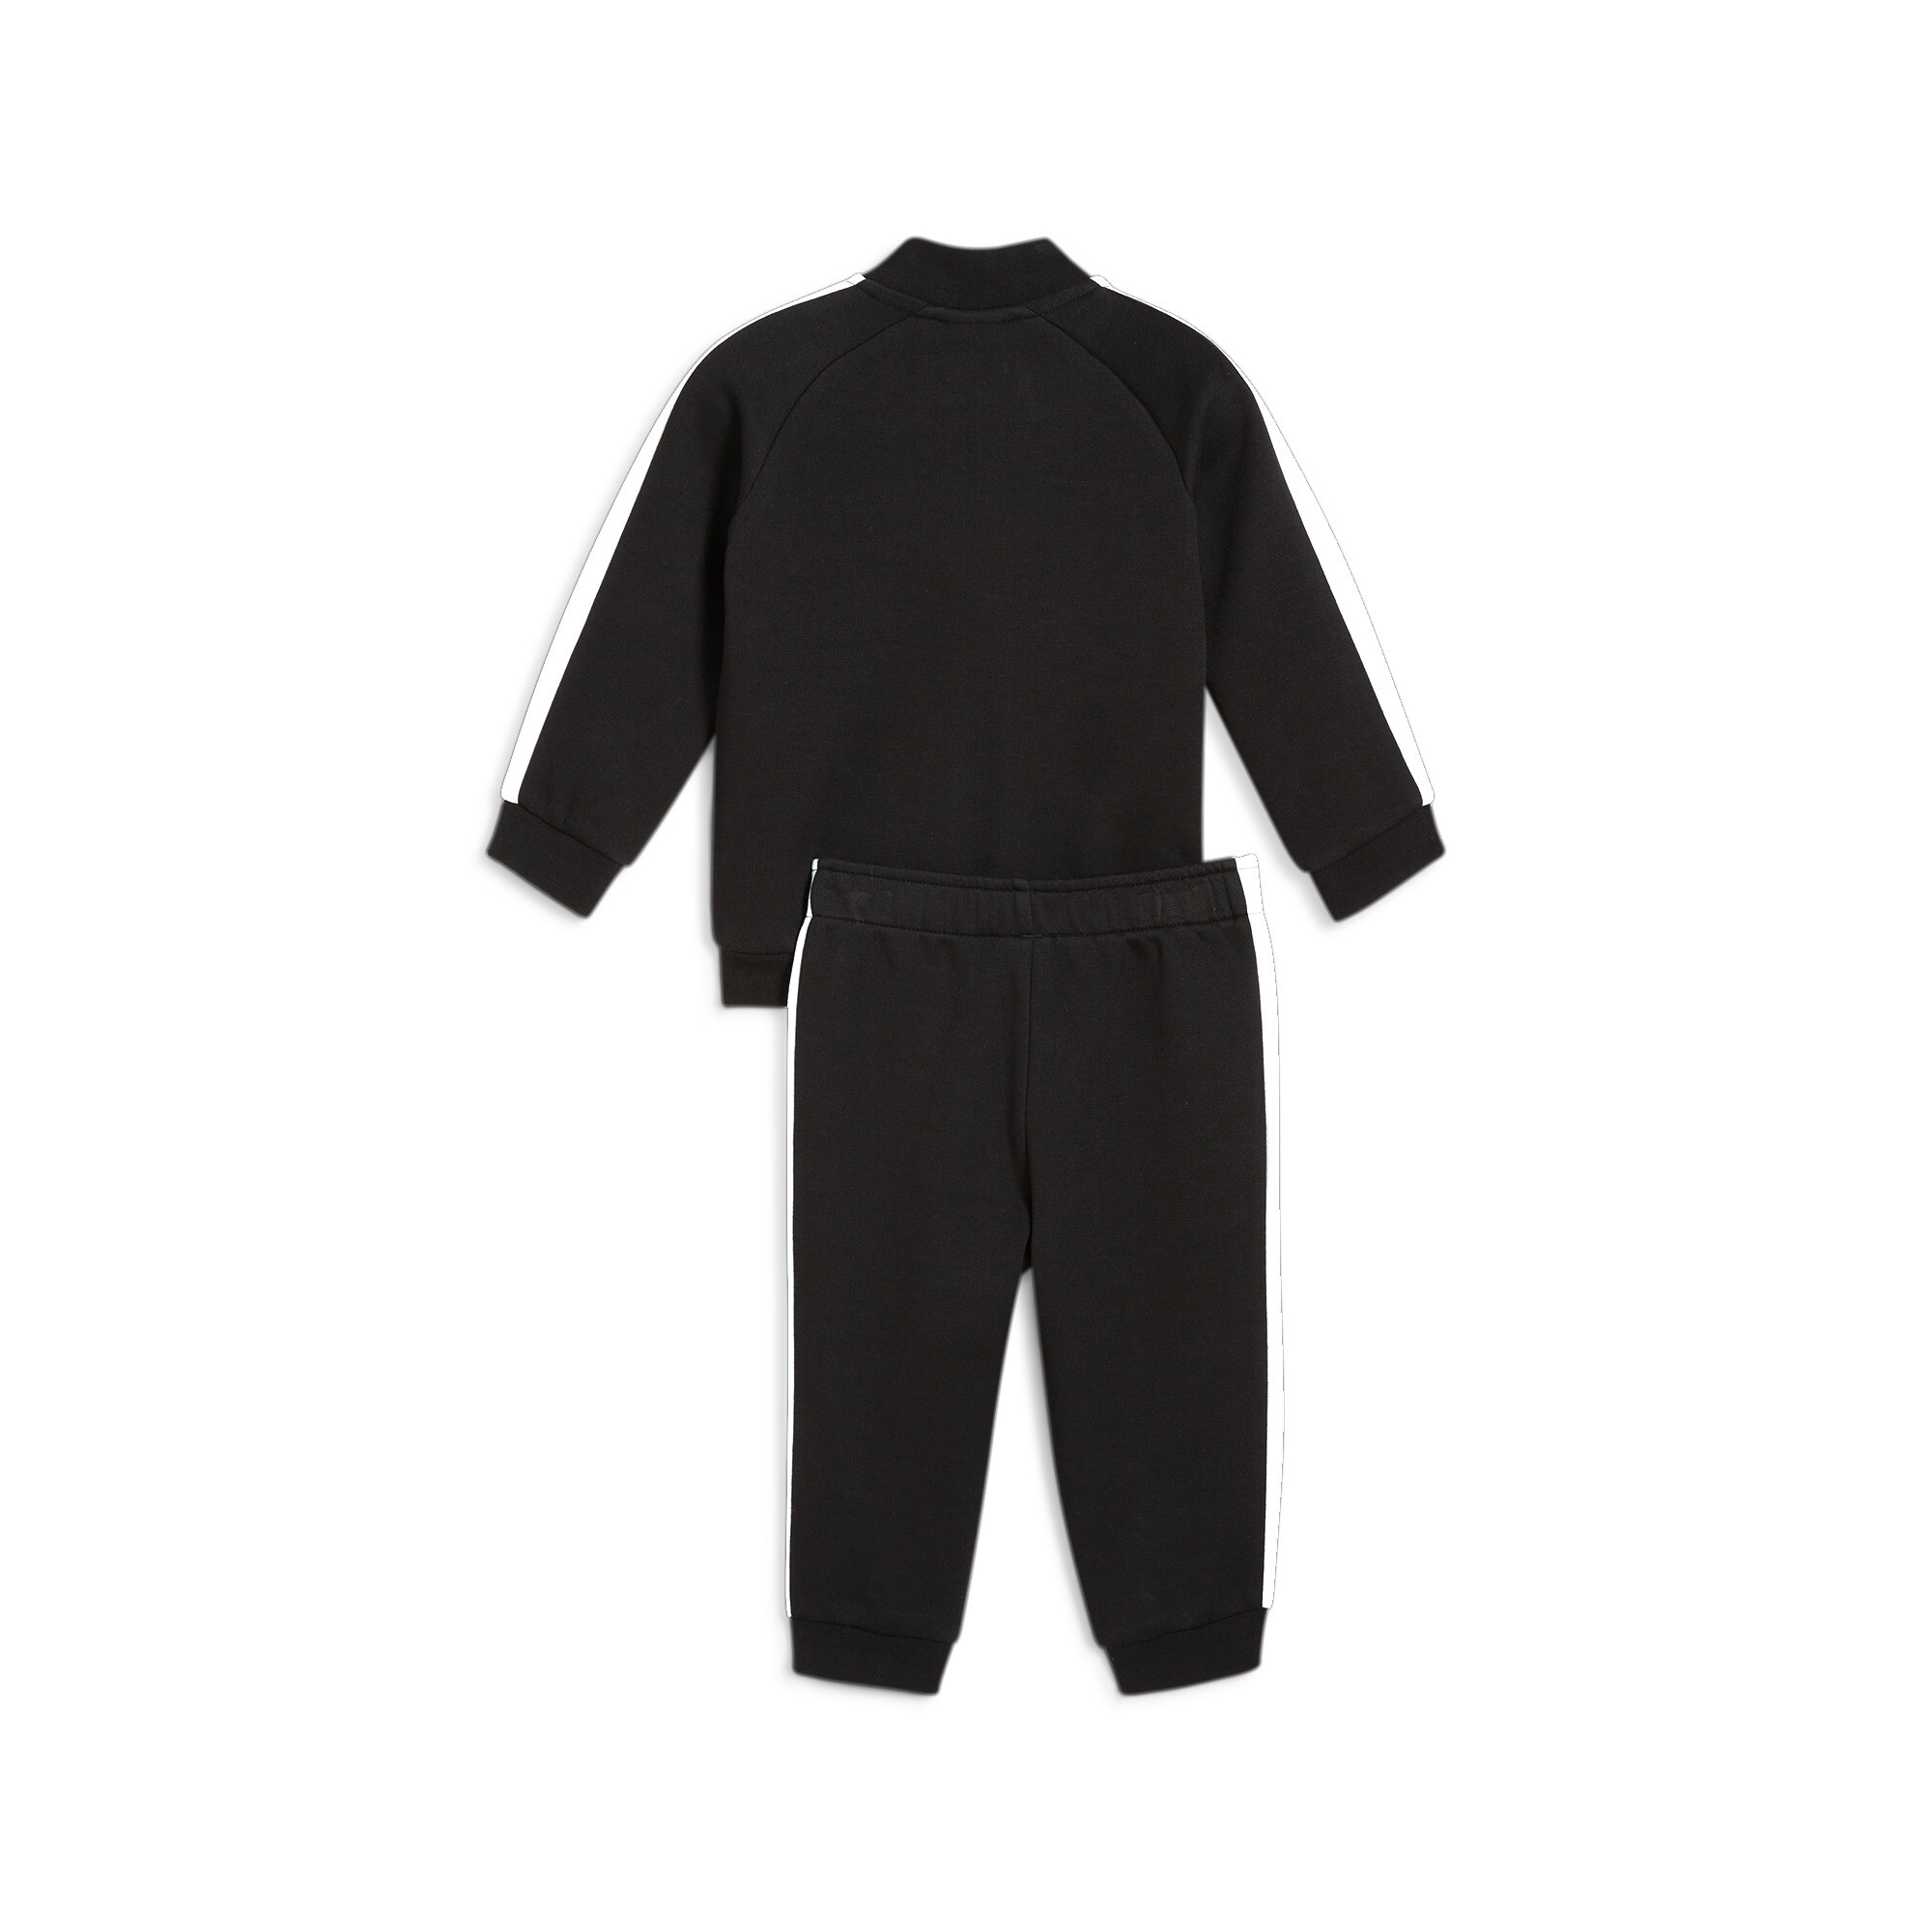 Kids' PUMA MINICATS T7 ICONIC Baby Tracksuit Set In Black, Size 2-3 Months